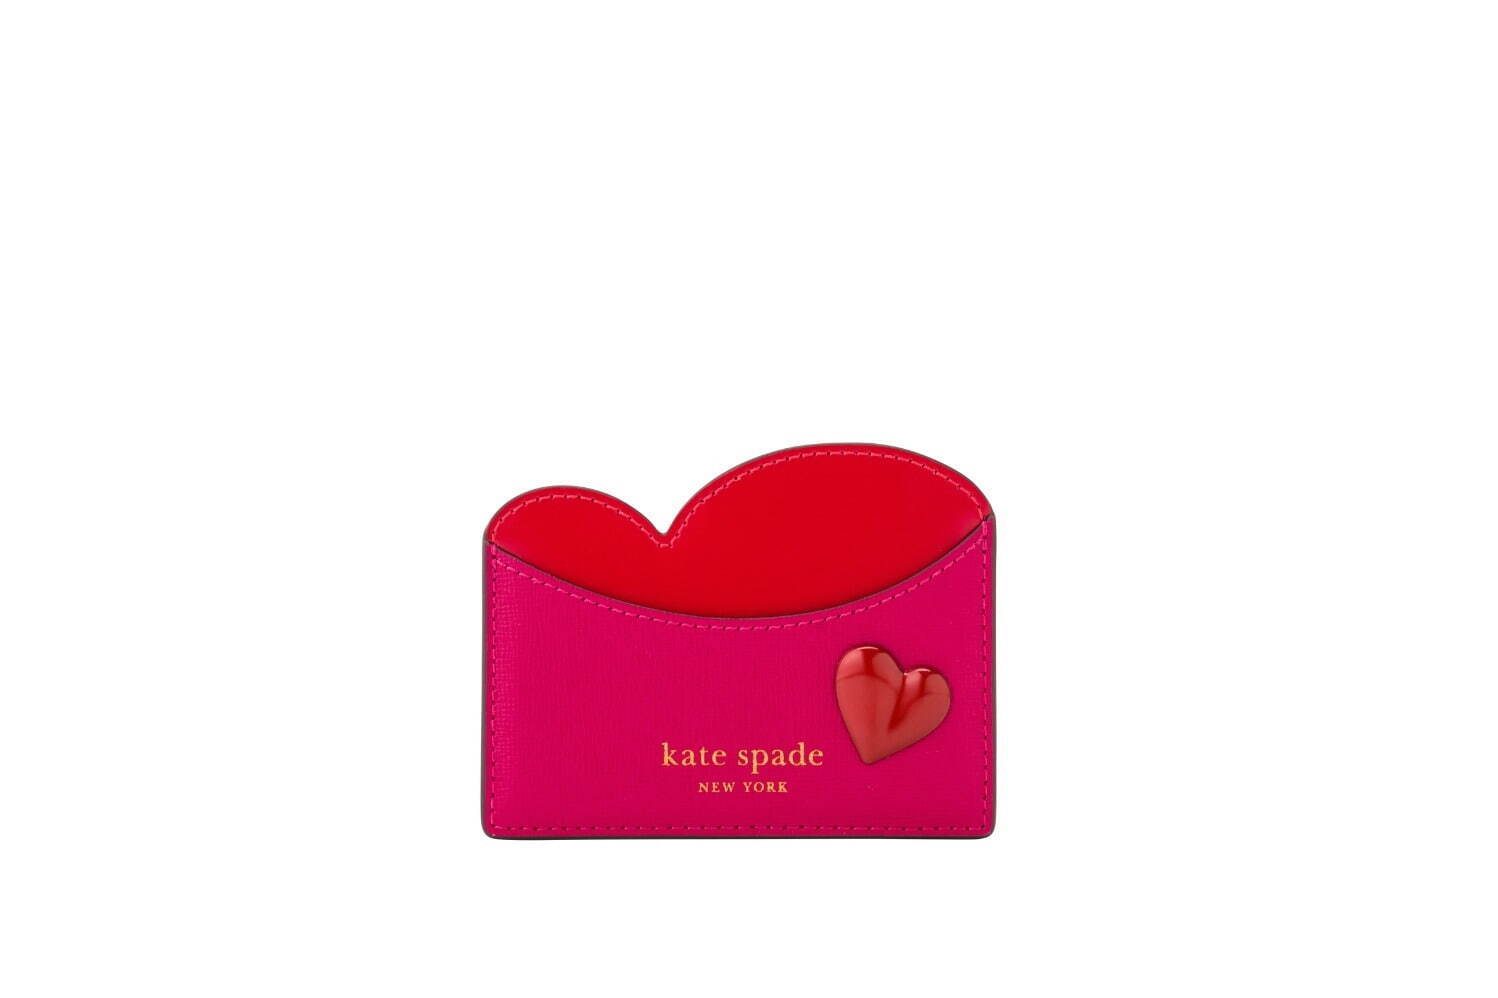 PITTER PATTER SMOOTH LEATHER card holder
16,500円